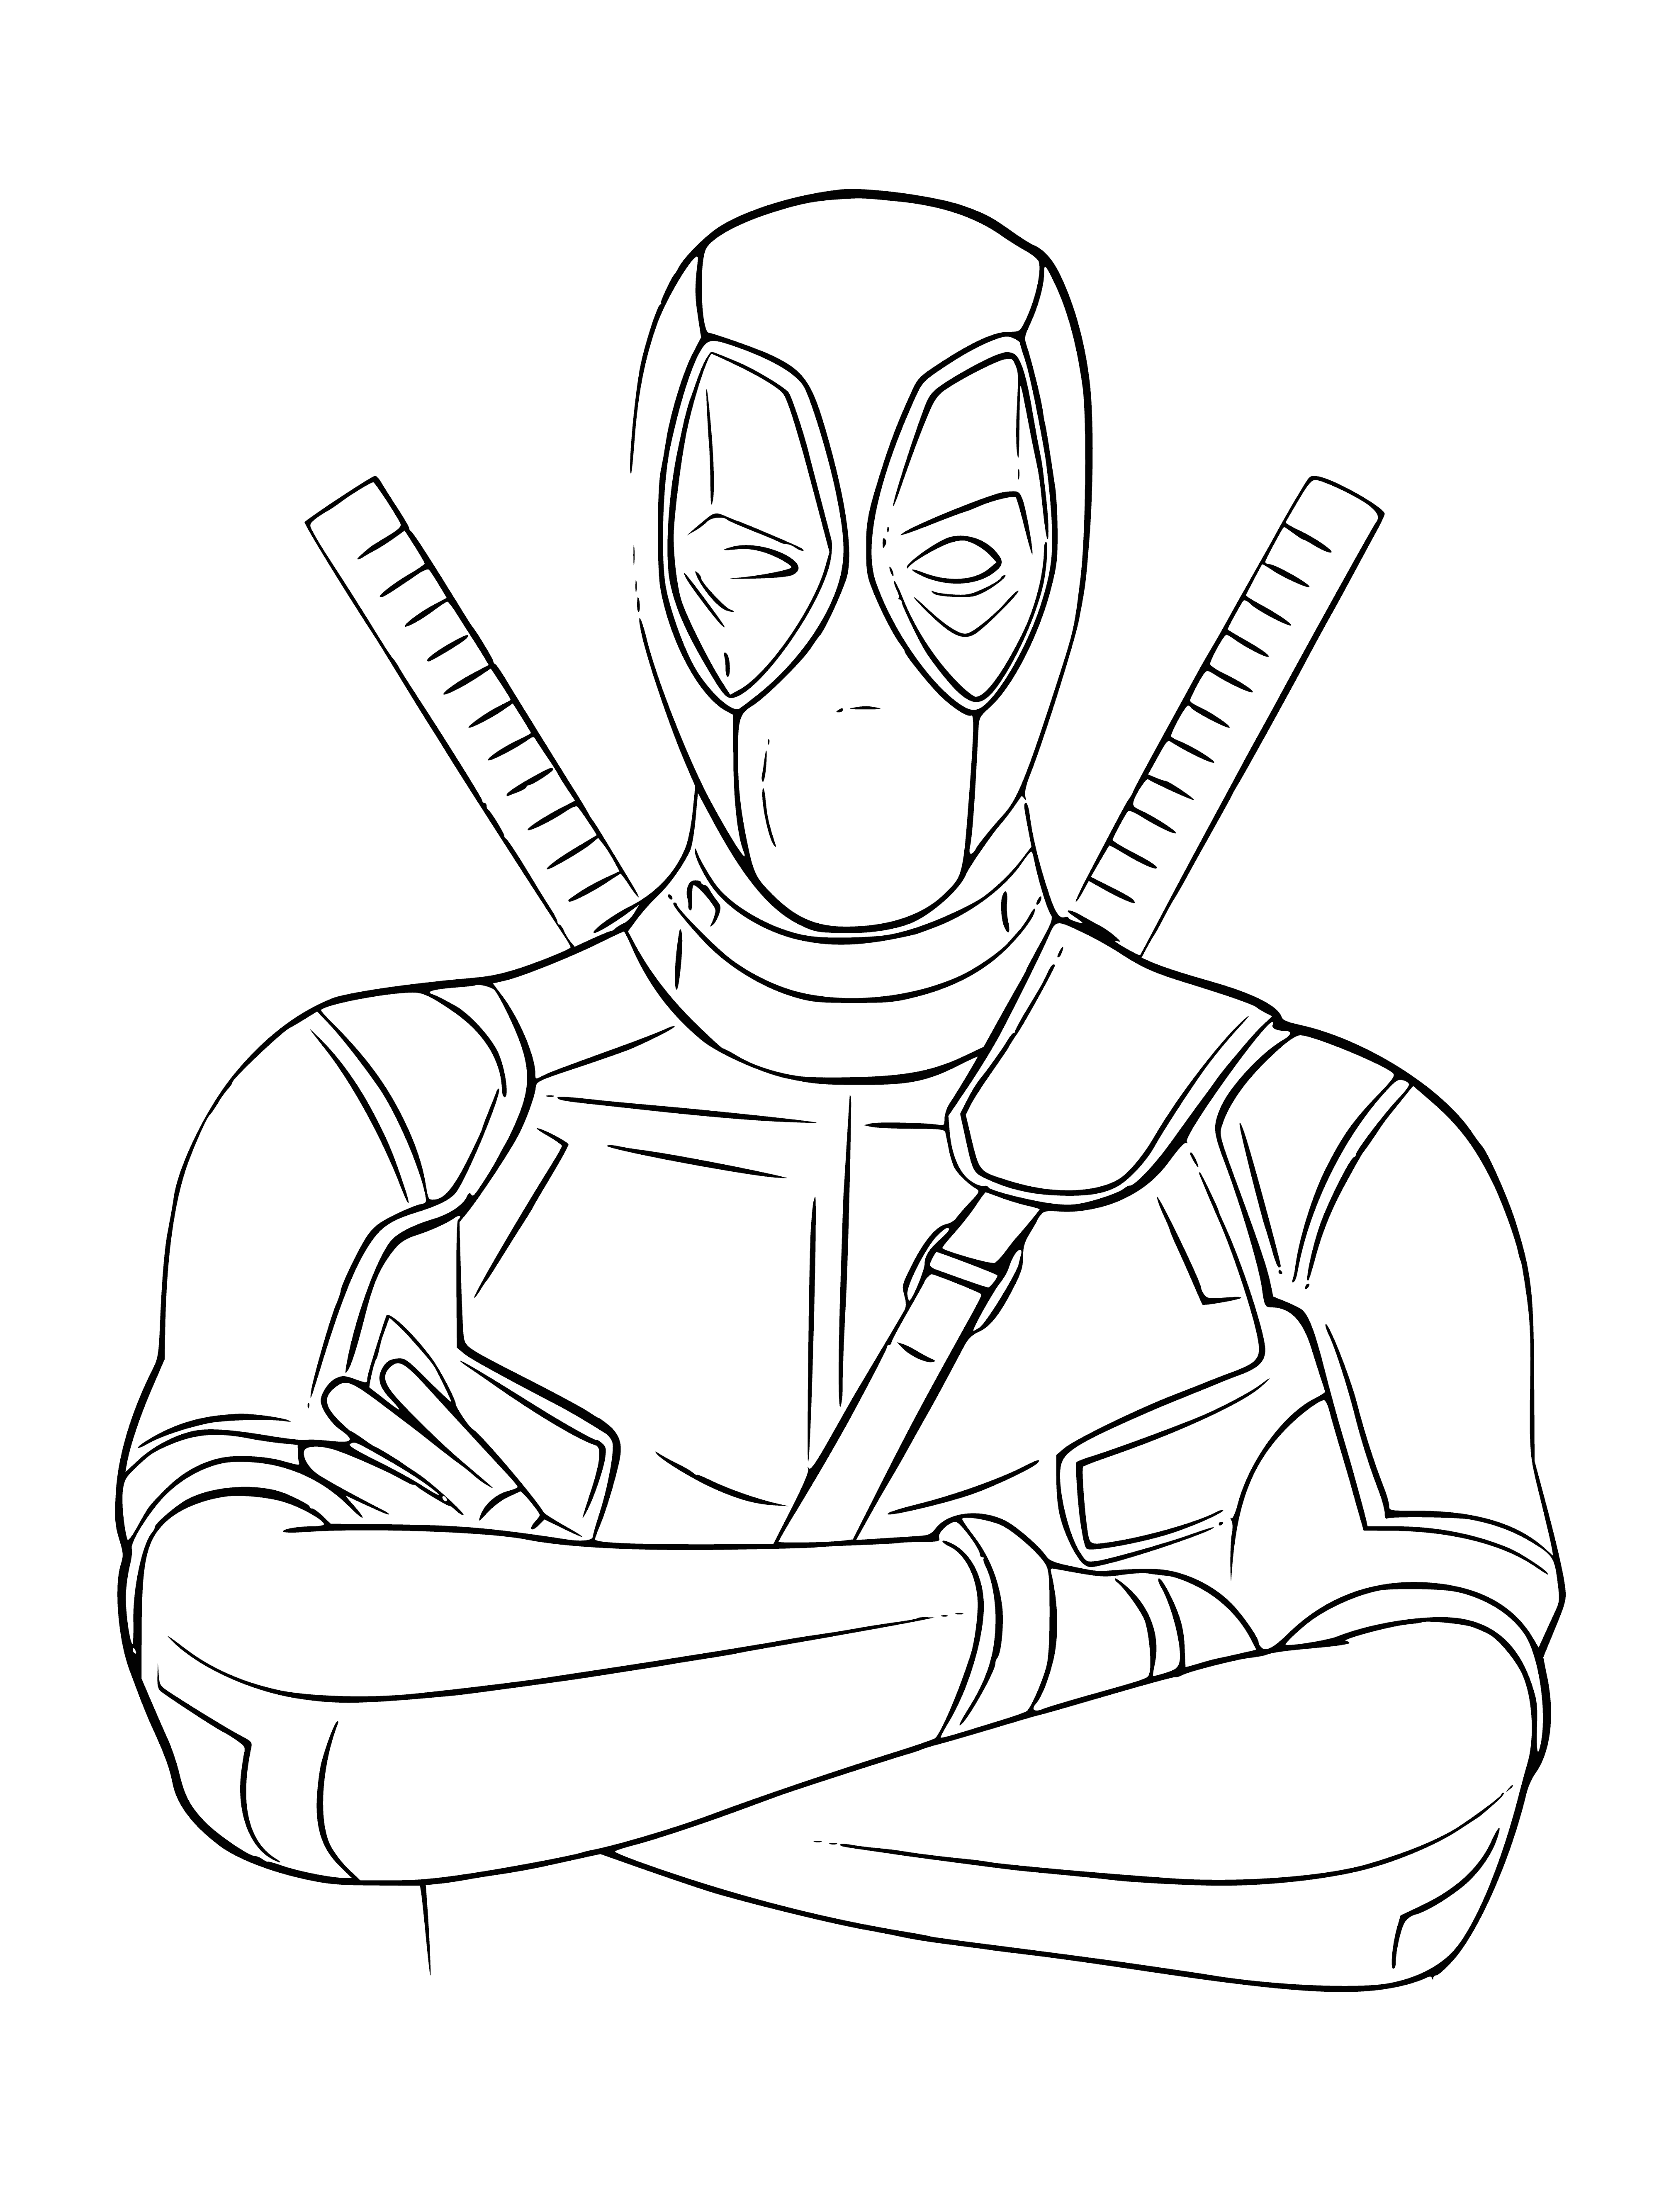 Deadpool coloring page